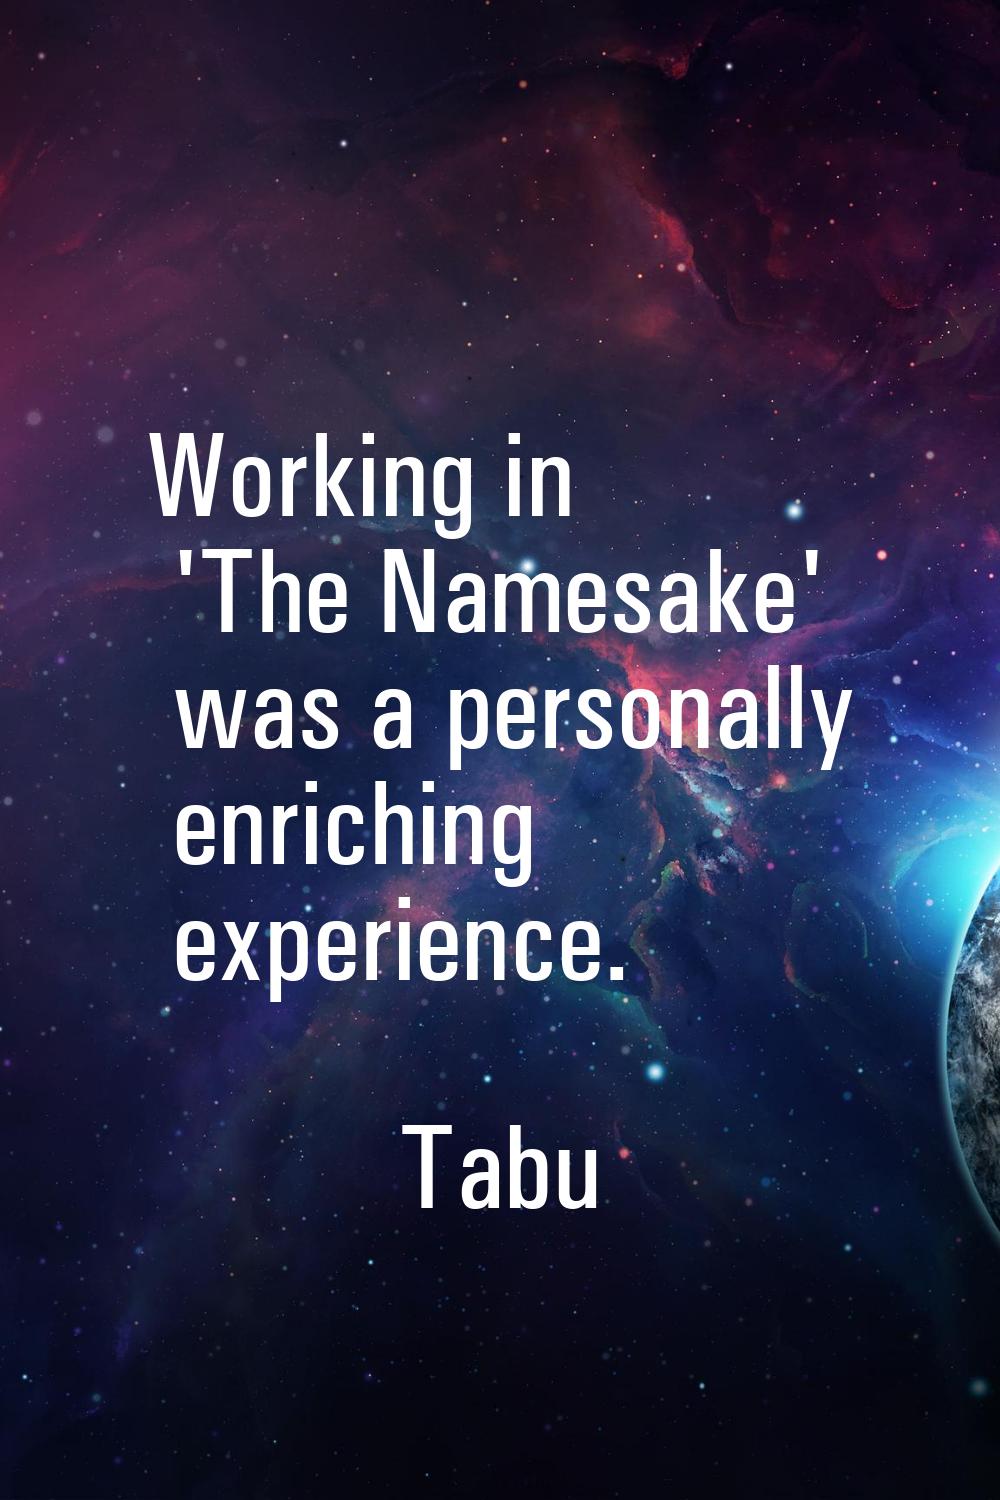 Working in 'The Namesake' was a personally enriching experience.